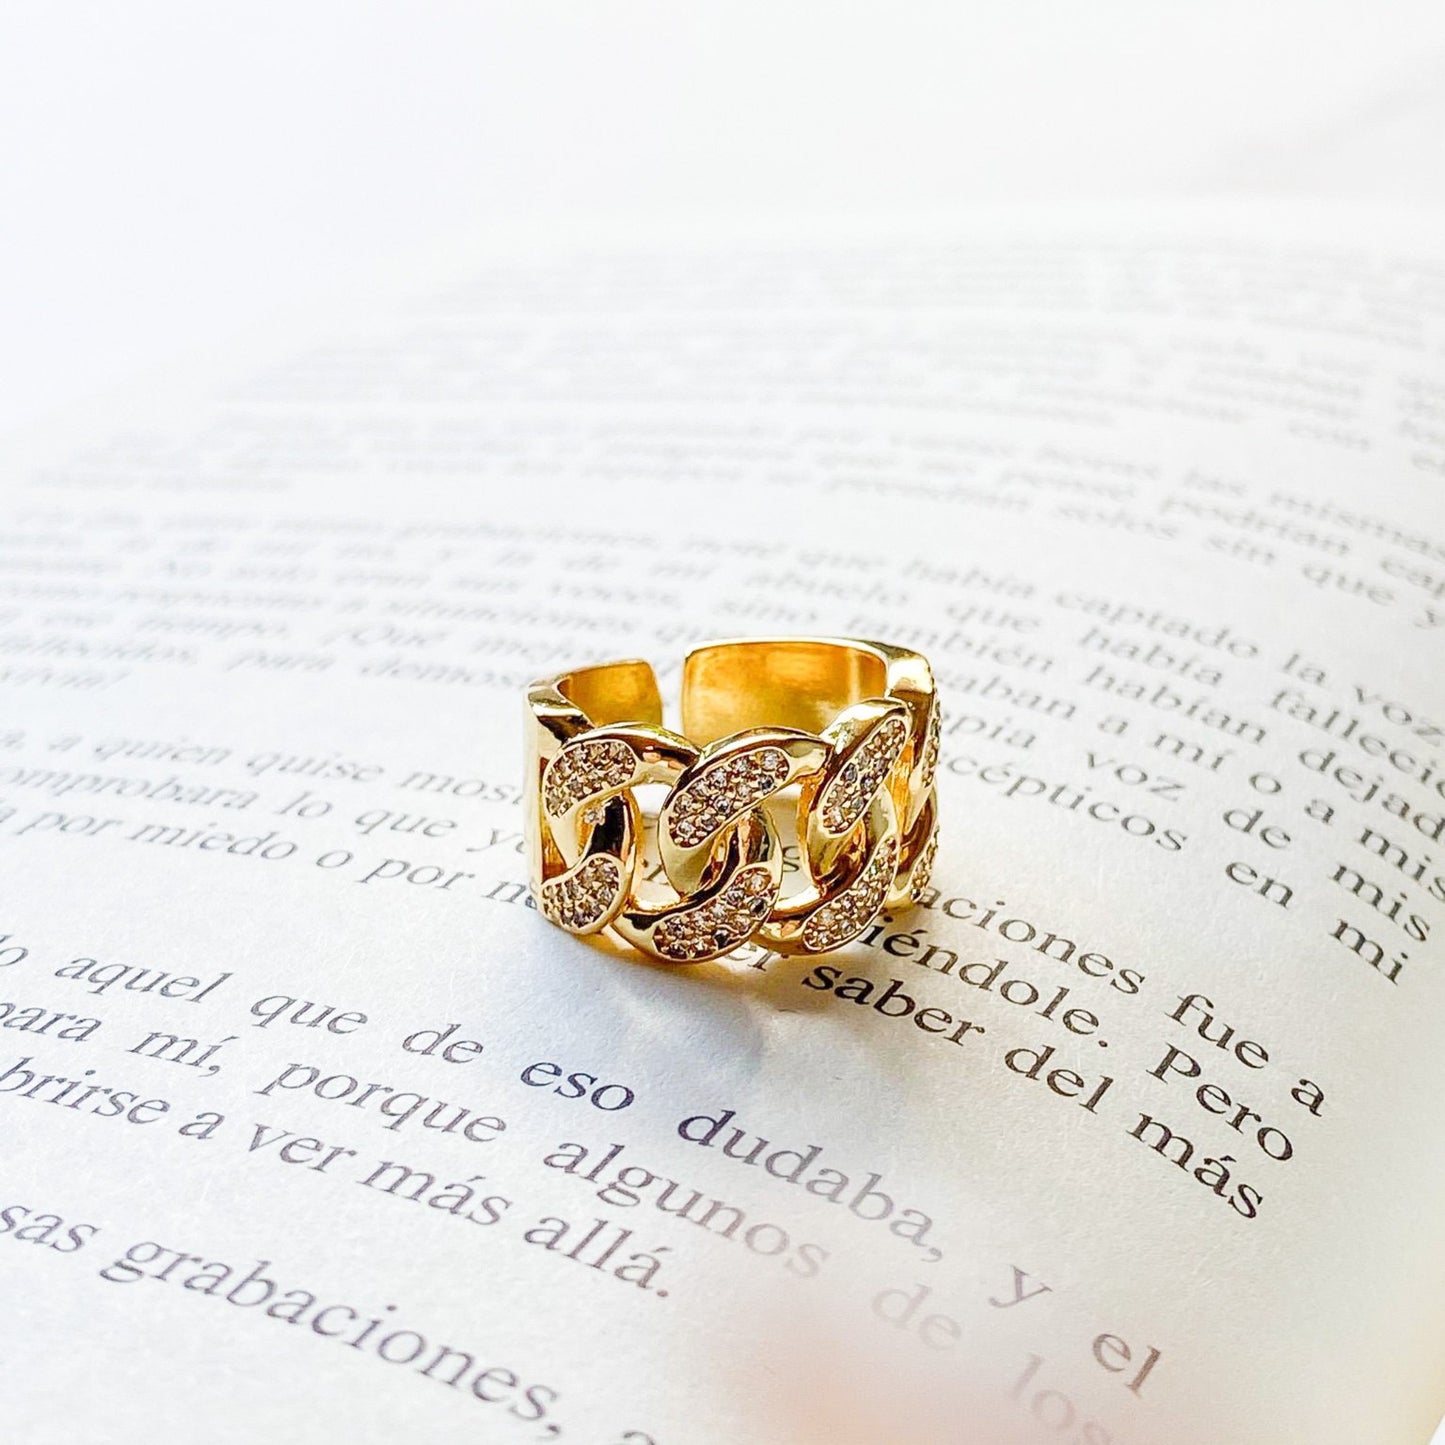 Lucy gold-filled ring, adjustable, water-resistant. Sold by ISVI Boutique Miami. Made in Brazil